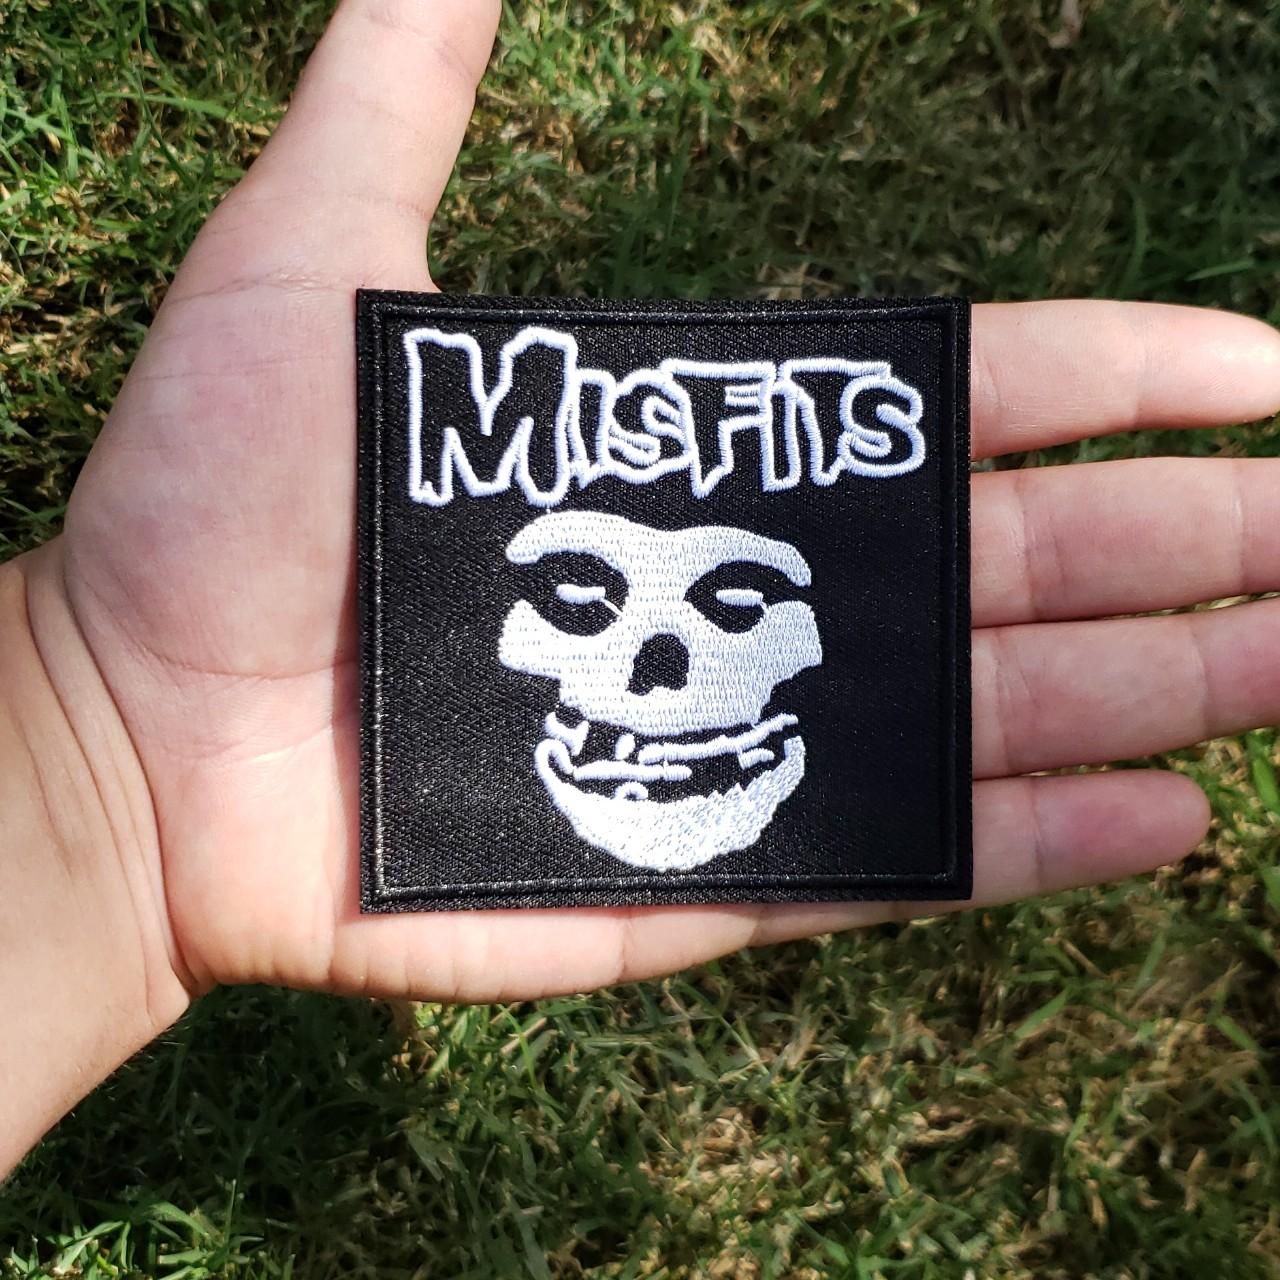 Misfits embroidered logo patch